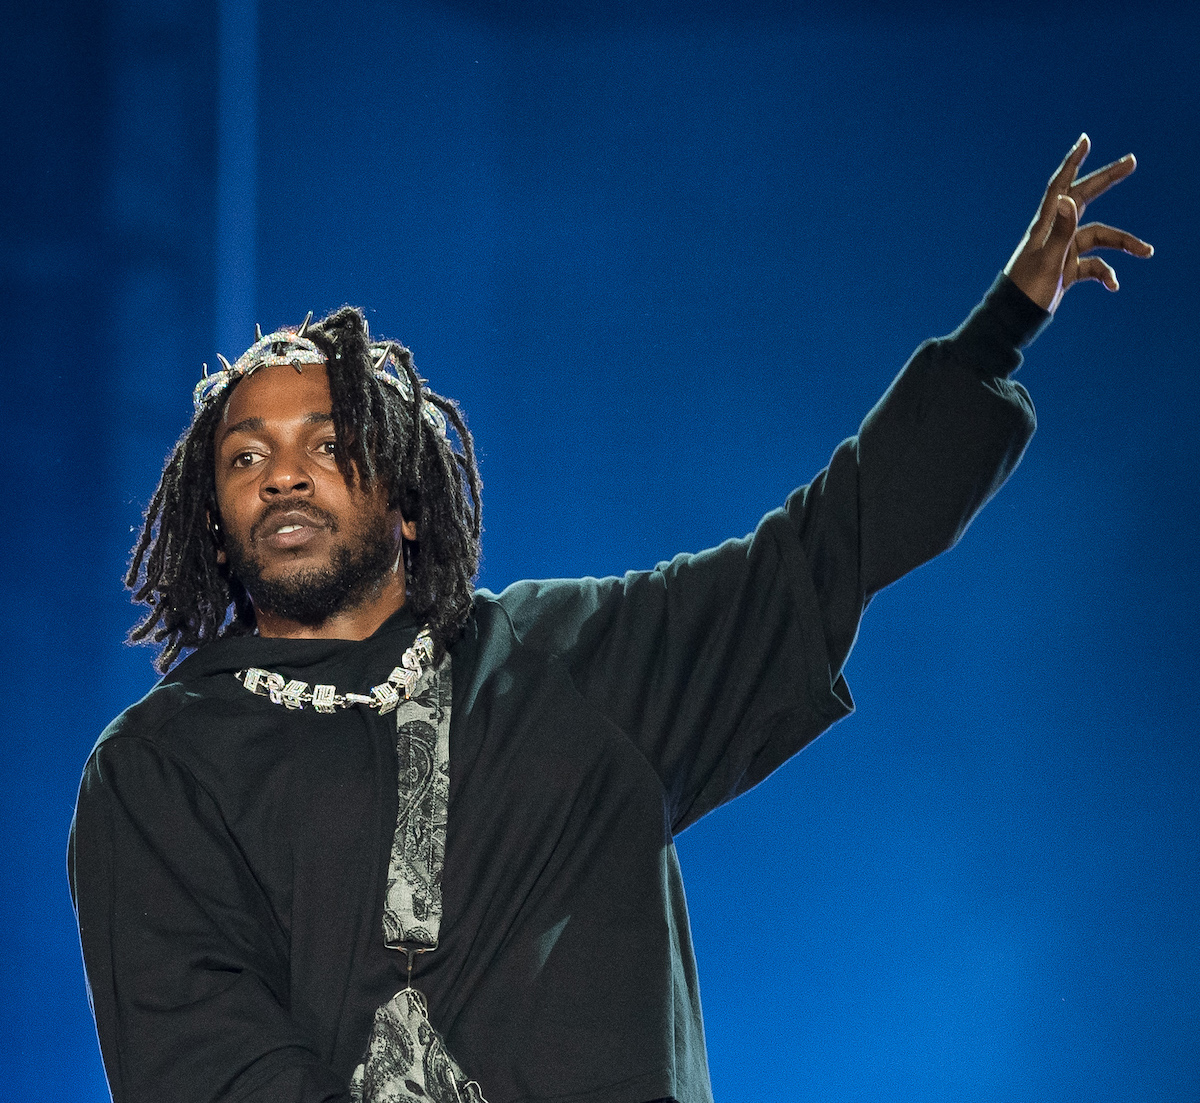 Kendrick Lamar Shares Reflective Message While on 'The Big Steppers Tour'